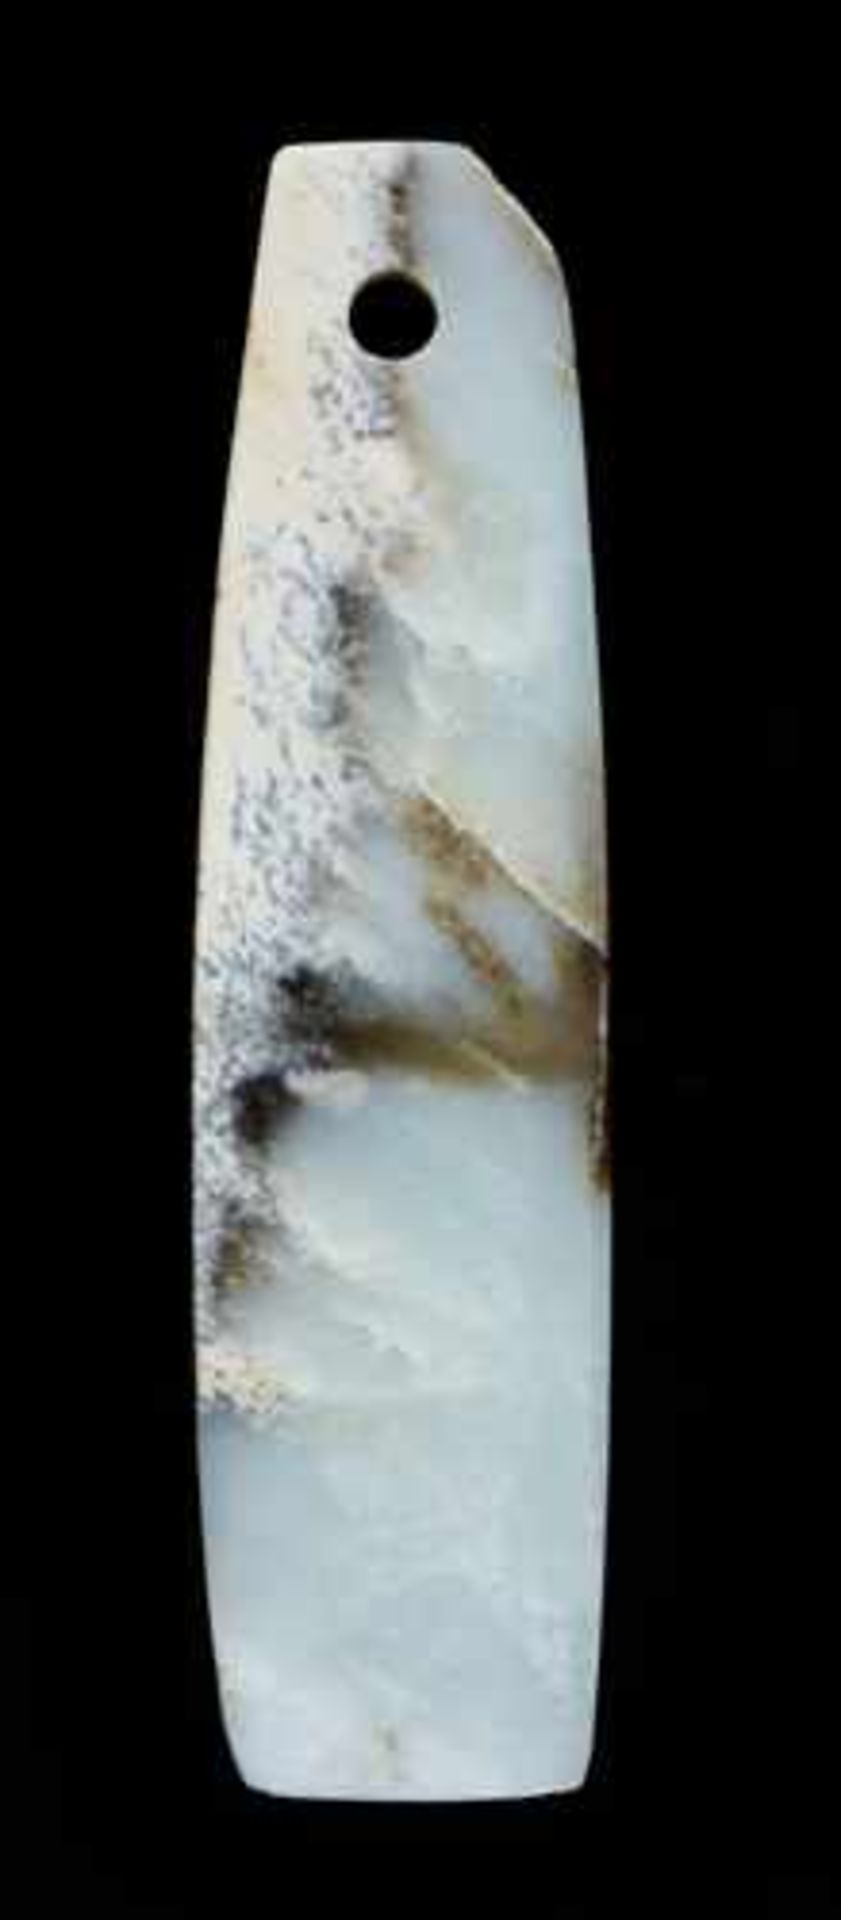 A STRIKING MARBLE-LIKE BEN BLADE IN WHITE JADE Jade, China. Early Bronze Age, Qijia Culture, c. - Image 2 of 7